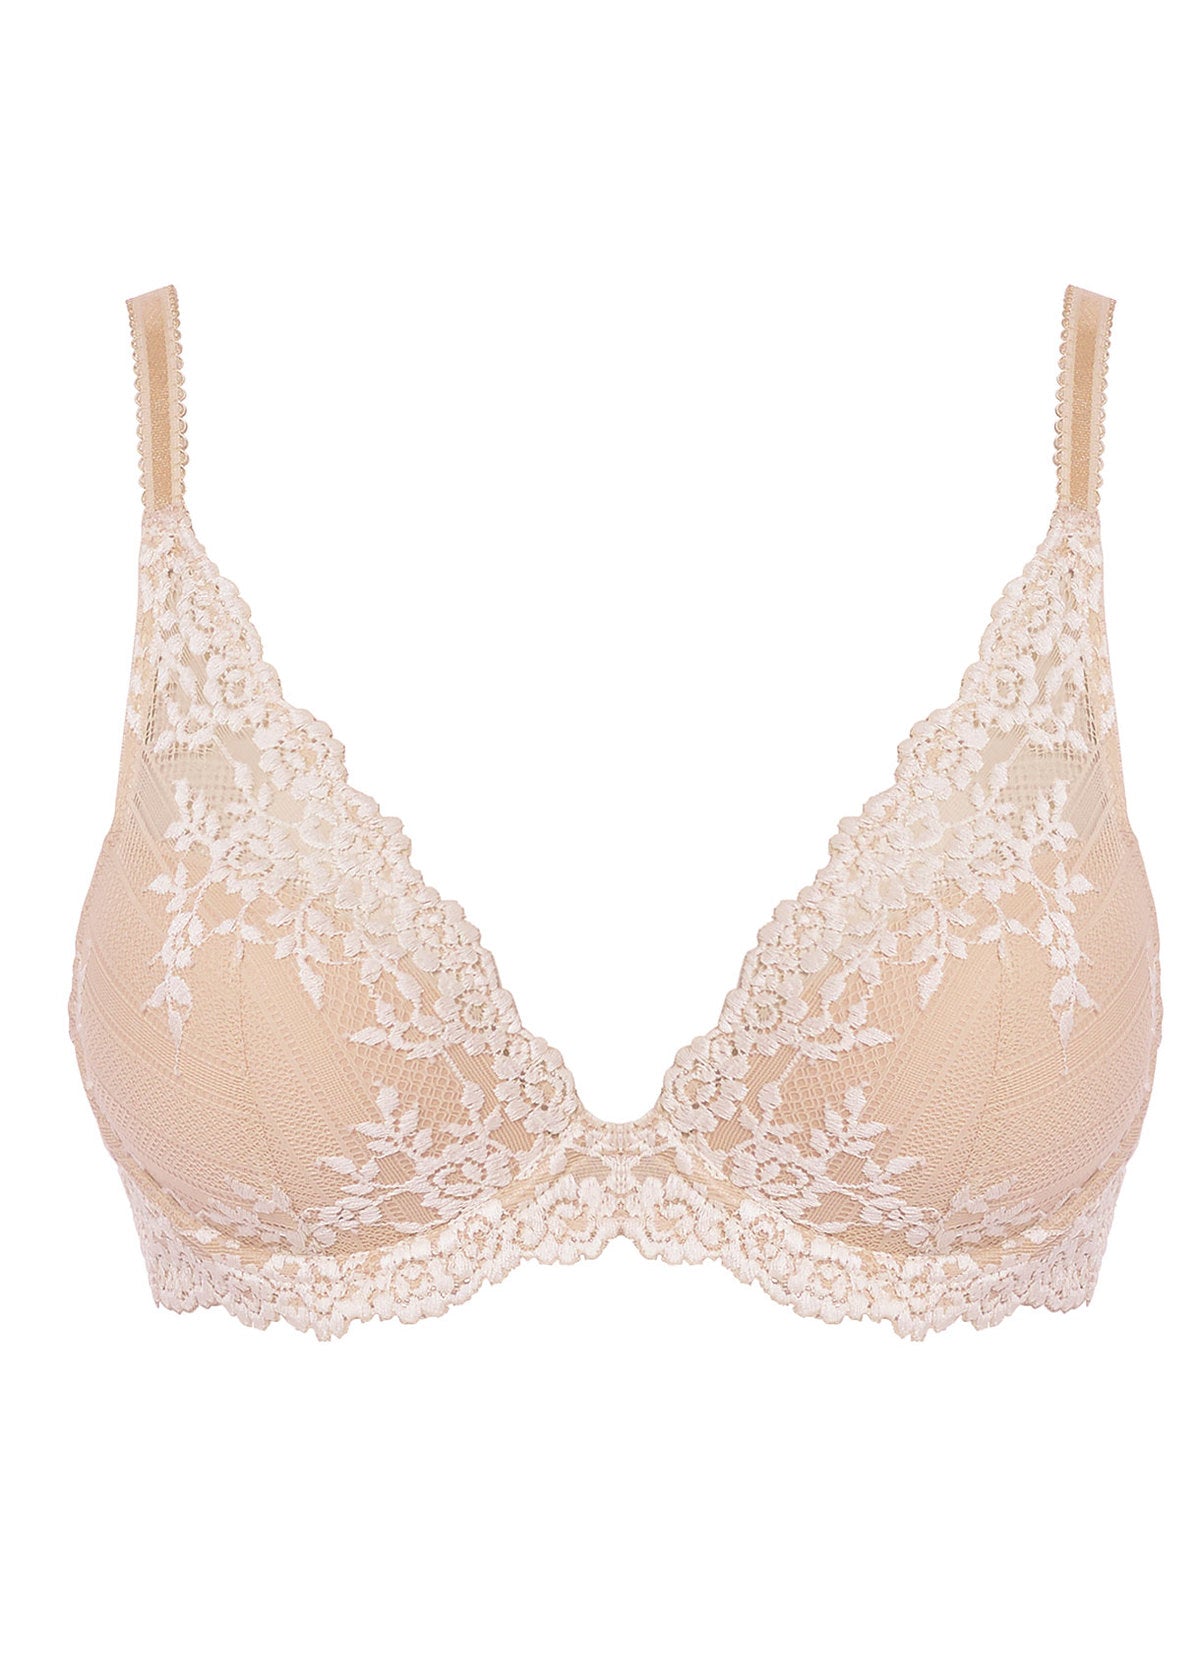 Wacoal Embrace Lace Naturally Nude / Ivory Plunge Underwire Bra